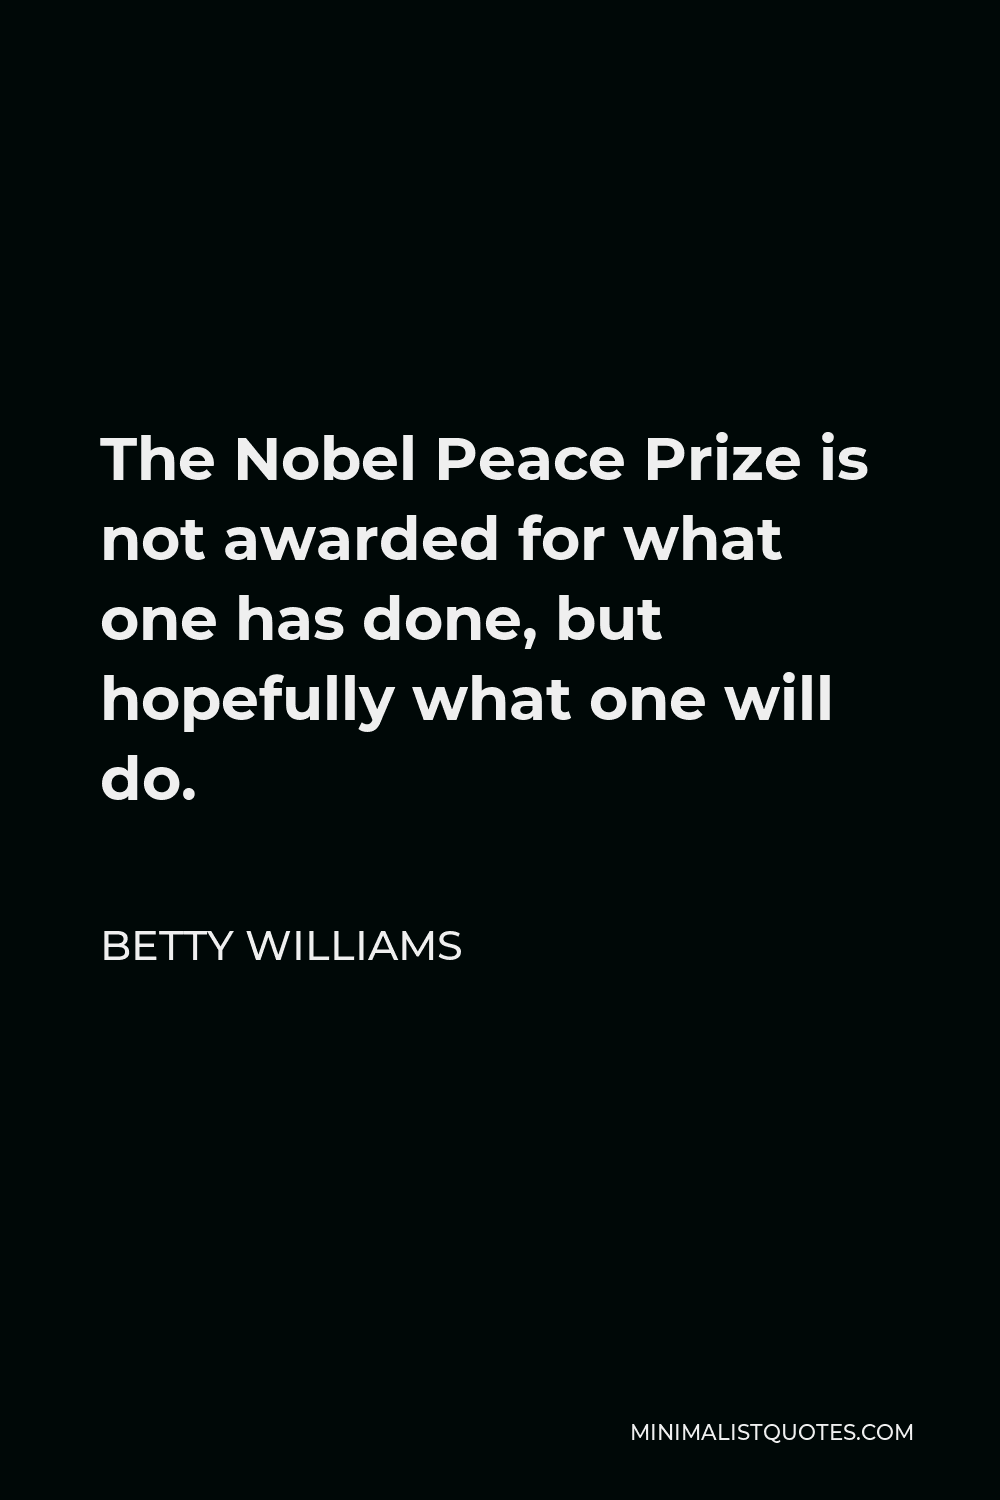 Betty Williams Quote - The Nobel Peace Prize is not awarded for what one has done, but hopefully what one will do.